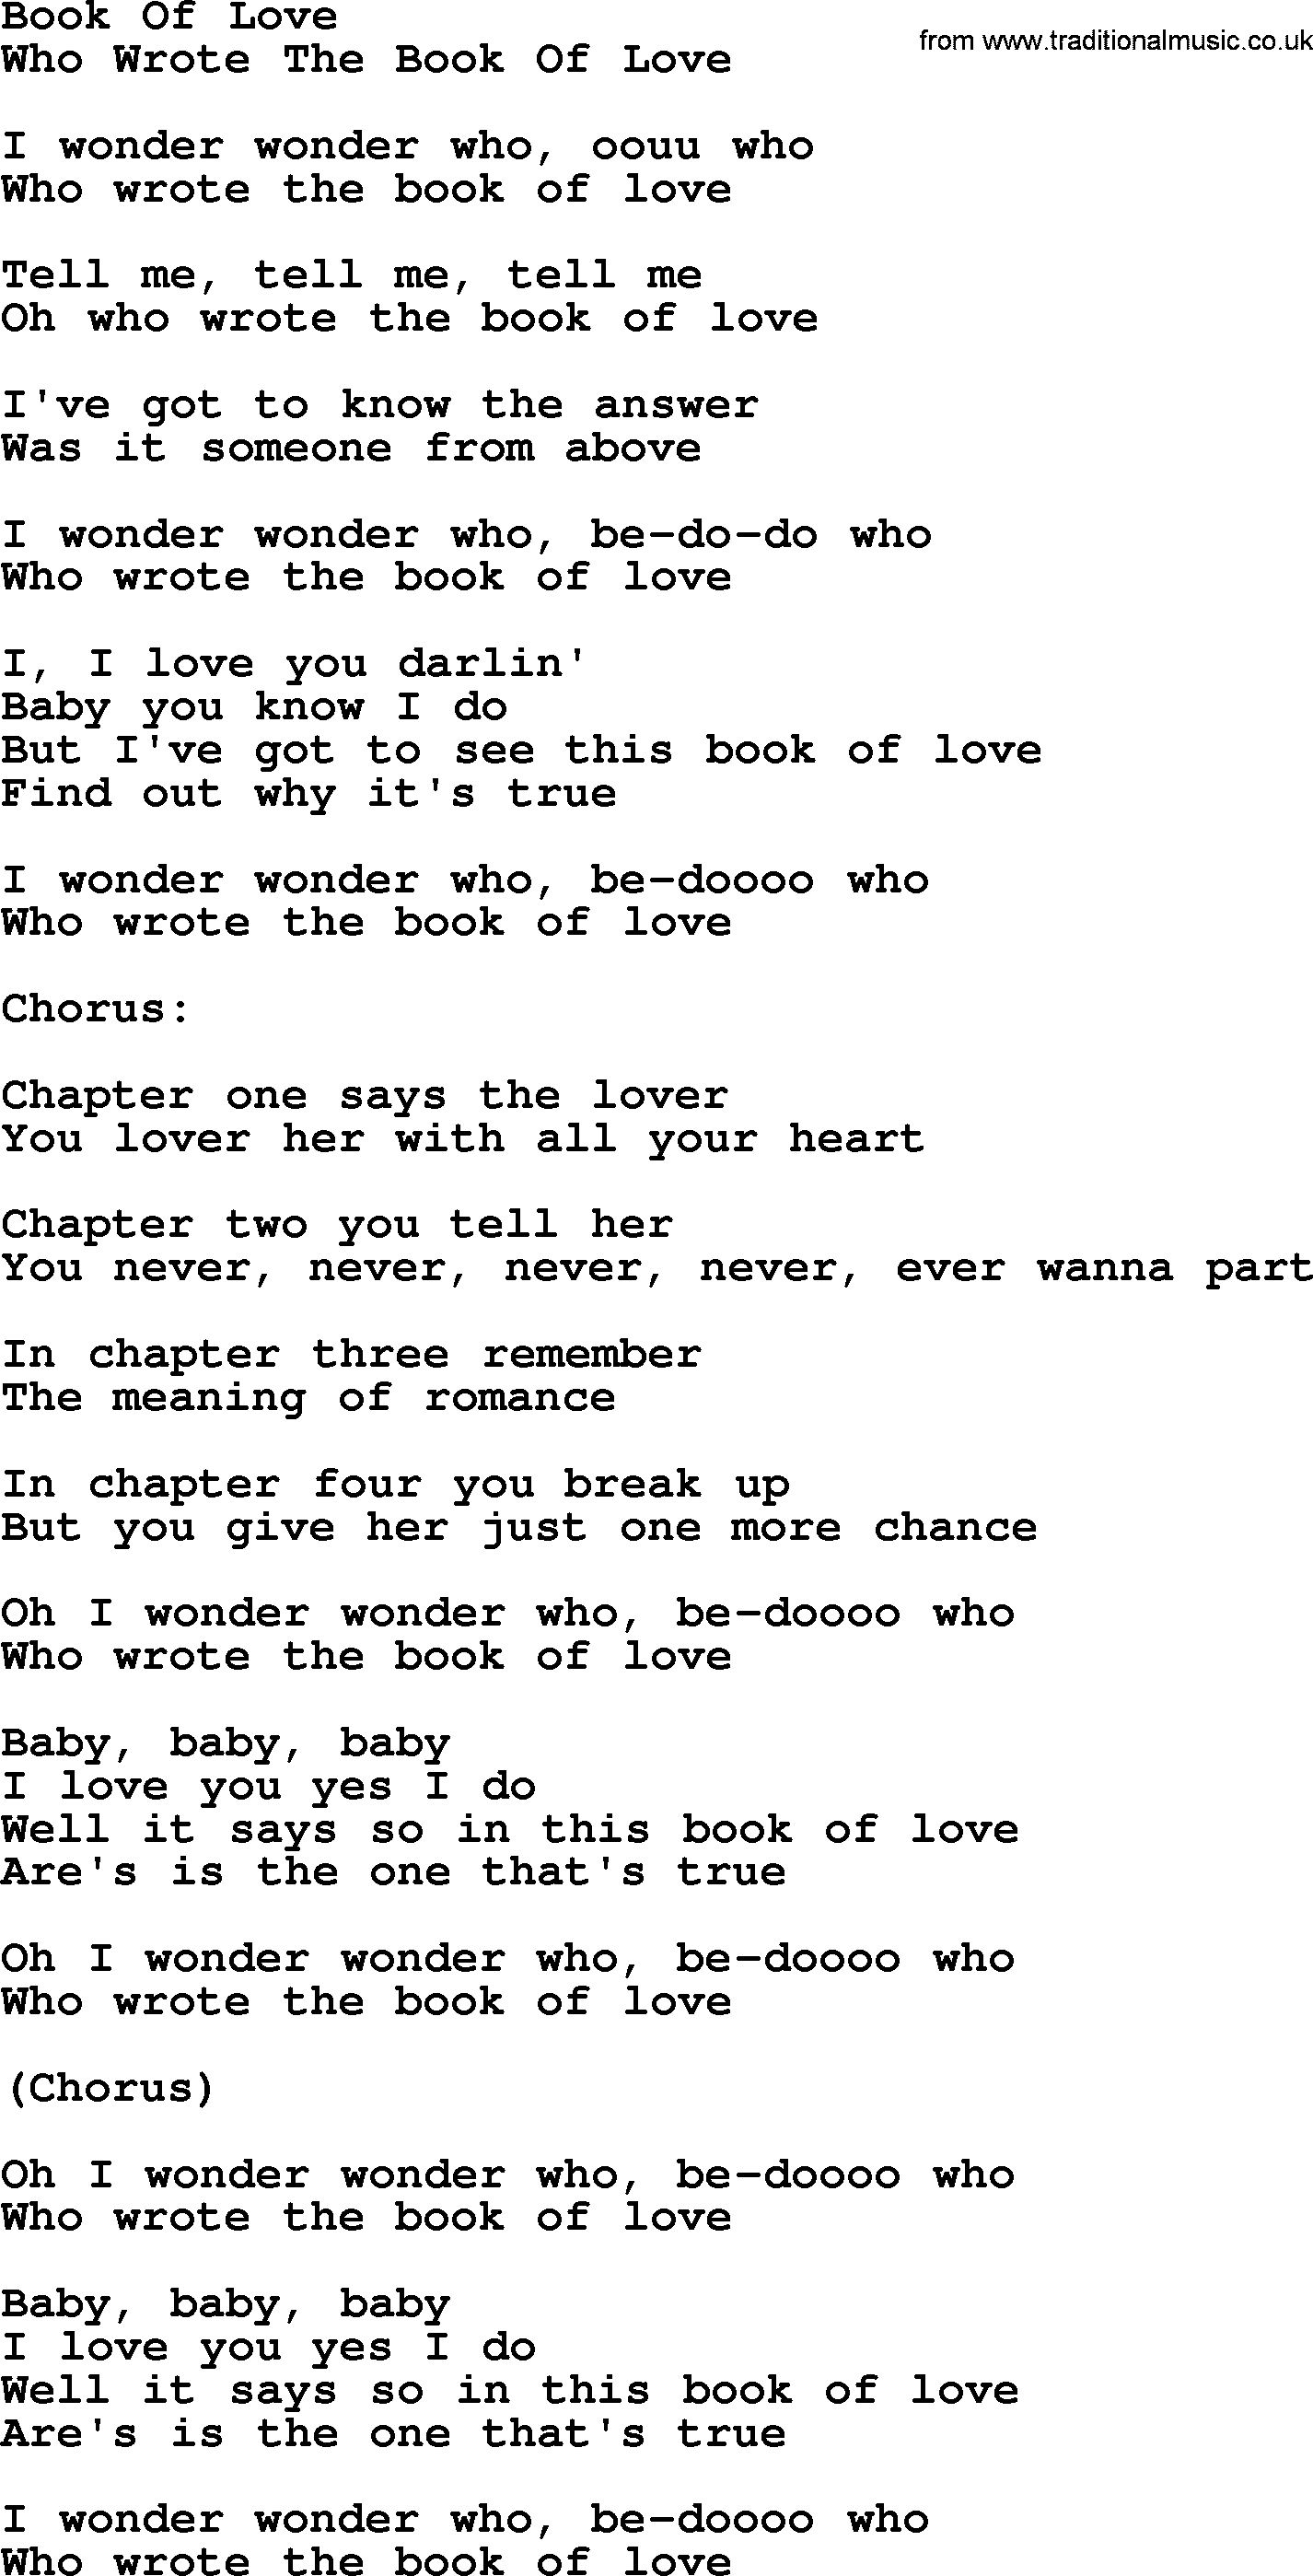 The Byrds song Book Of Love, lyrics